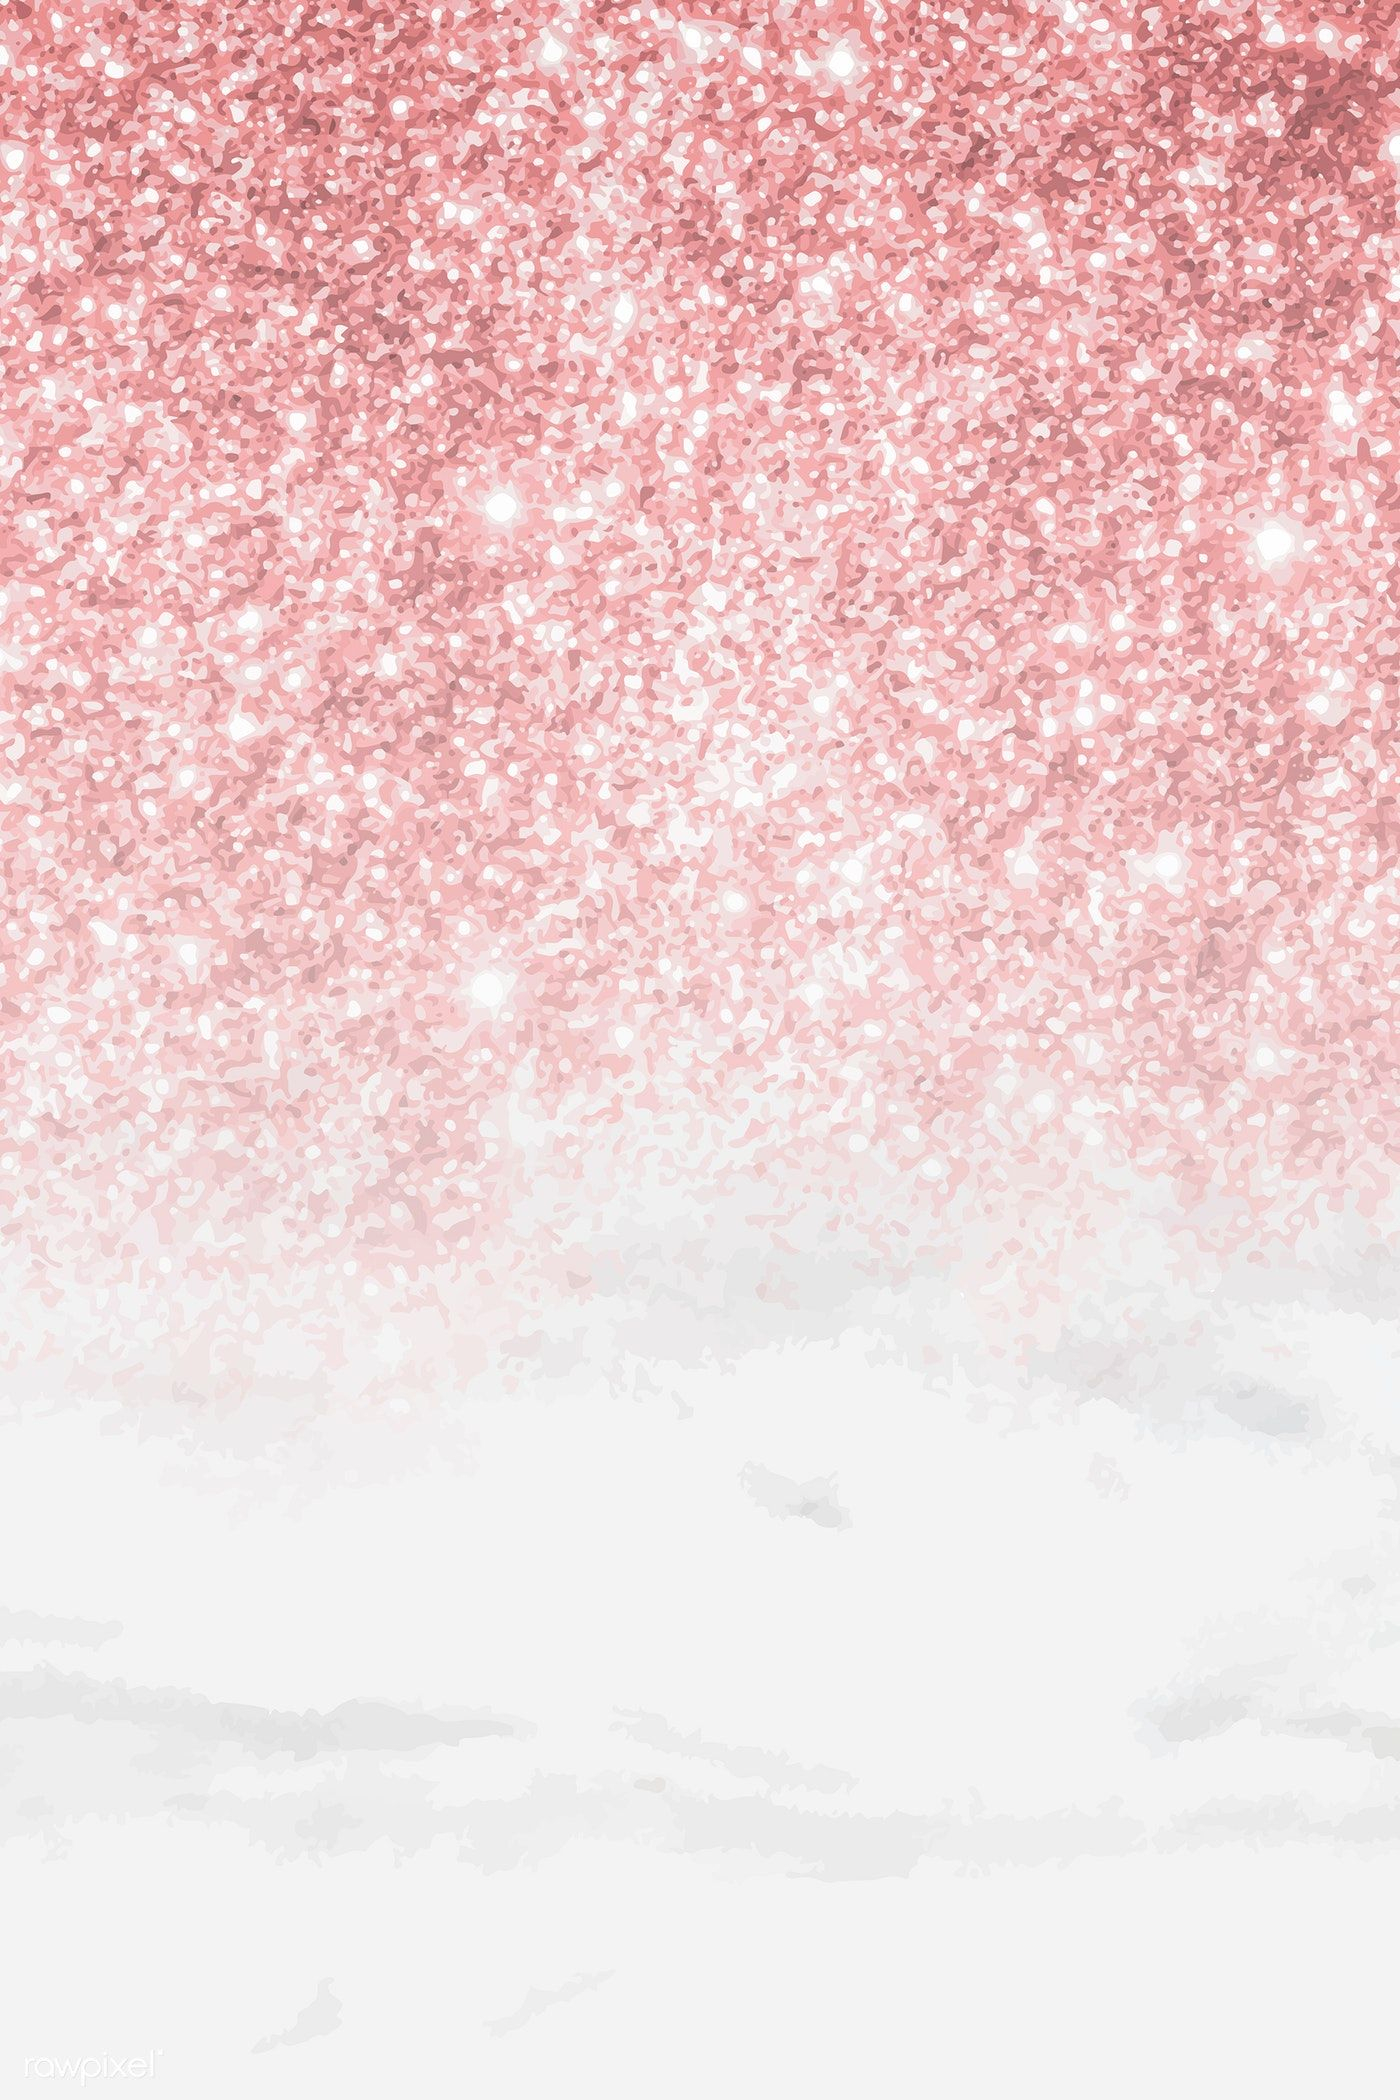 1400x2100 Pink glittery pattern on white marble background vector | premium image by | Pink glitter background, Pink sparkle background, White marble background